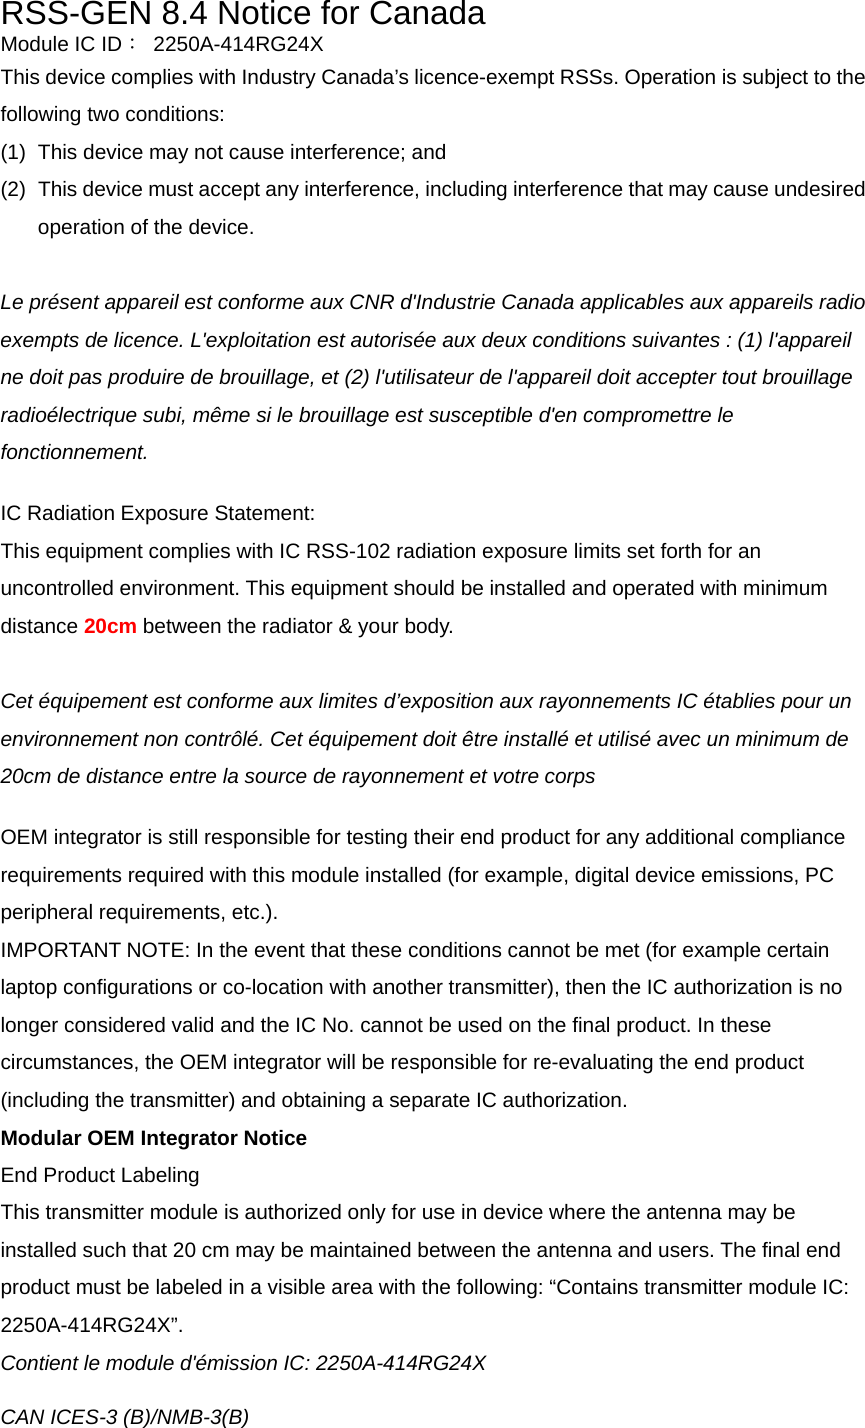 RSS-GEN 8.4 Notice for Canada Module IC ID： 2250A-414RG24X This device complies with Industry Canada’s licence-exempt RSSs. Operation is subject to the following two conditions: (1)  This device may not cause interference; and   (2)  This device must accept any interference, including interference that may cause undesired operation of the device.  Le présent appareil est conforme aux CNR d&apos;Industrie Canada applicables aux appareils radio exempts de licence. L&apos;exploitation est autorisée aux deux conditions suivantes : (1) l&apos;appareil ne doit pas produire de brouillage, et (2) l&apos;utilisateur de l&apos;appareil doit accepter tout brouillage radioélectrique subi, même si le brouillage est susceptible d&apos;en compromettre le fonctionnement.  IC Radiation Exposure Statement: This equipment complies with IC RSS-102 radiation exposure limits set forth for an uncontrolled environment. This equipment should be installed and operated with minimum distance 20cm between the radiator &amp; your body.  Cet équipement est conforme aux limites d’exposition aux rayonnements IC établies pour un environnement non contrôlé. Cet équipement doit être installé et utilisé avec un minimum de 20cm de distance entre la source de rayonnement et votre corps  OEM integrator is still responsible for testing their end product for any additional compliance requirements required with this module installed (for example, digital device emissions, PC peripheral requirements, etc.). IMPORTANT NOTE: In the event that these conditions cannot be met (for example certain laptop configurations or co-location with another transmitter), then the IC authorization is no longer considered valid and the IC No. cannot be used on the final product. In these circumstances, the OEM integrator will be responsible for re-evaluating the end product (including the transmitter) and obtaining a separate IC authorization. Modular OEM Integrator Notice End Product Labeling This transmitter module is authorized only for use in device where the antenna may be installed such that 20 cm may be maintained between the antenna and users. The final end product must be labeled in a visible area with the following: “Contains transmitter module IC: 2250A-414RG24X”. Contient le module d&apos;émission IC: 2250A-414RG24X  CAN ICES-3 (B)/NMB-3(B)  